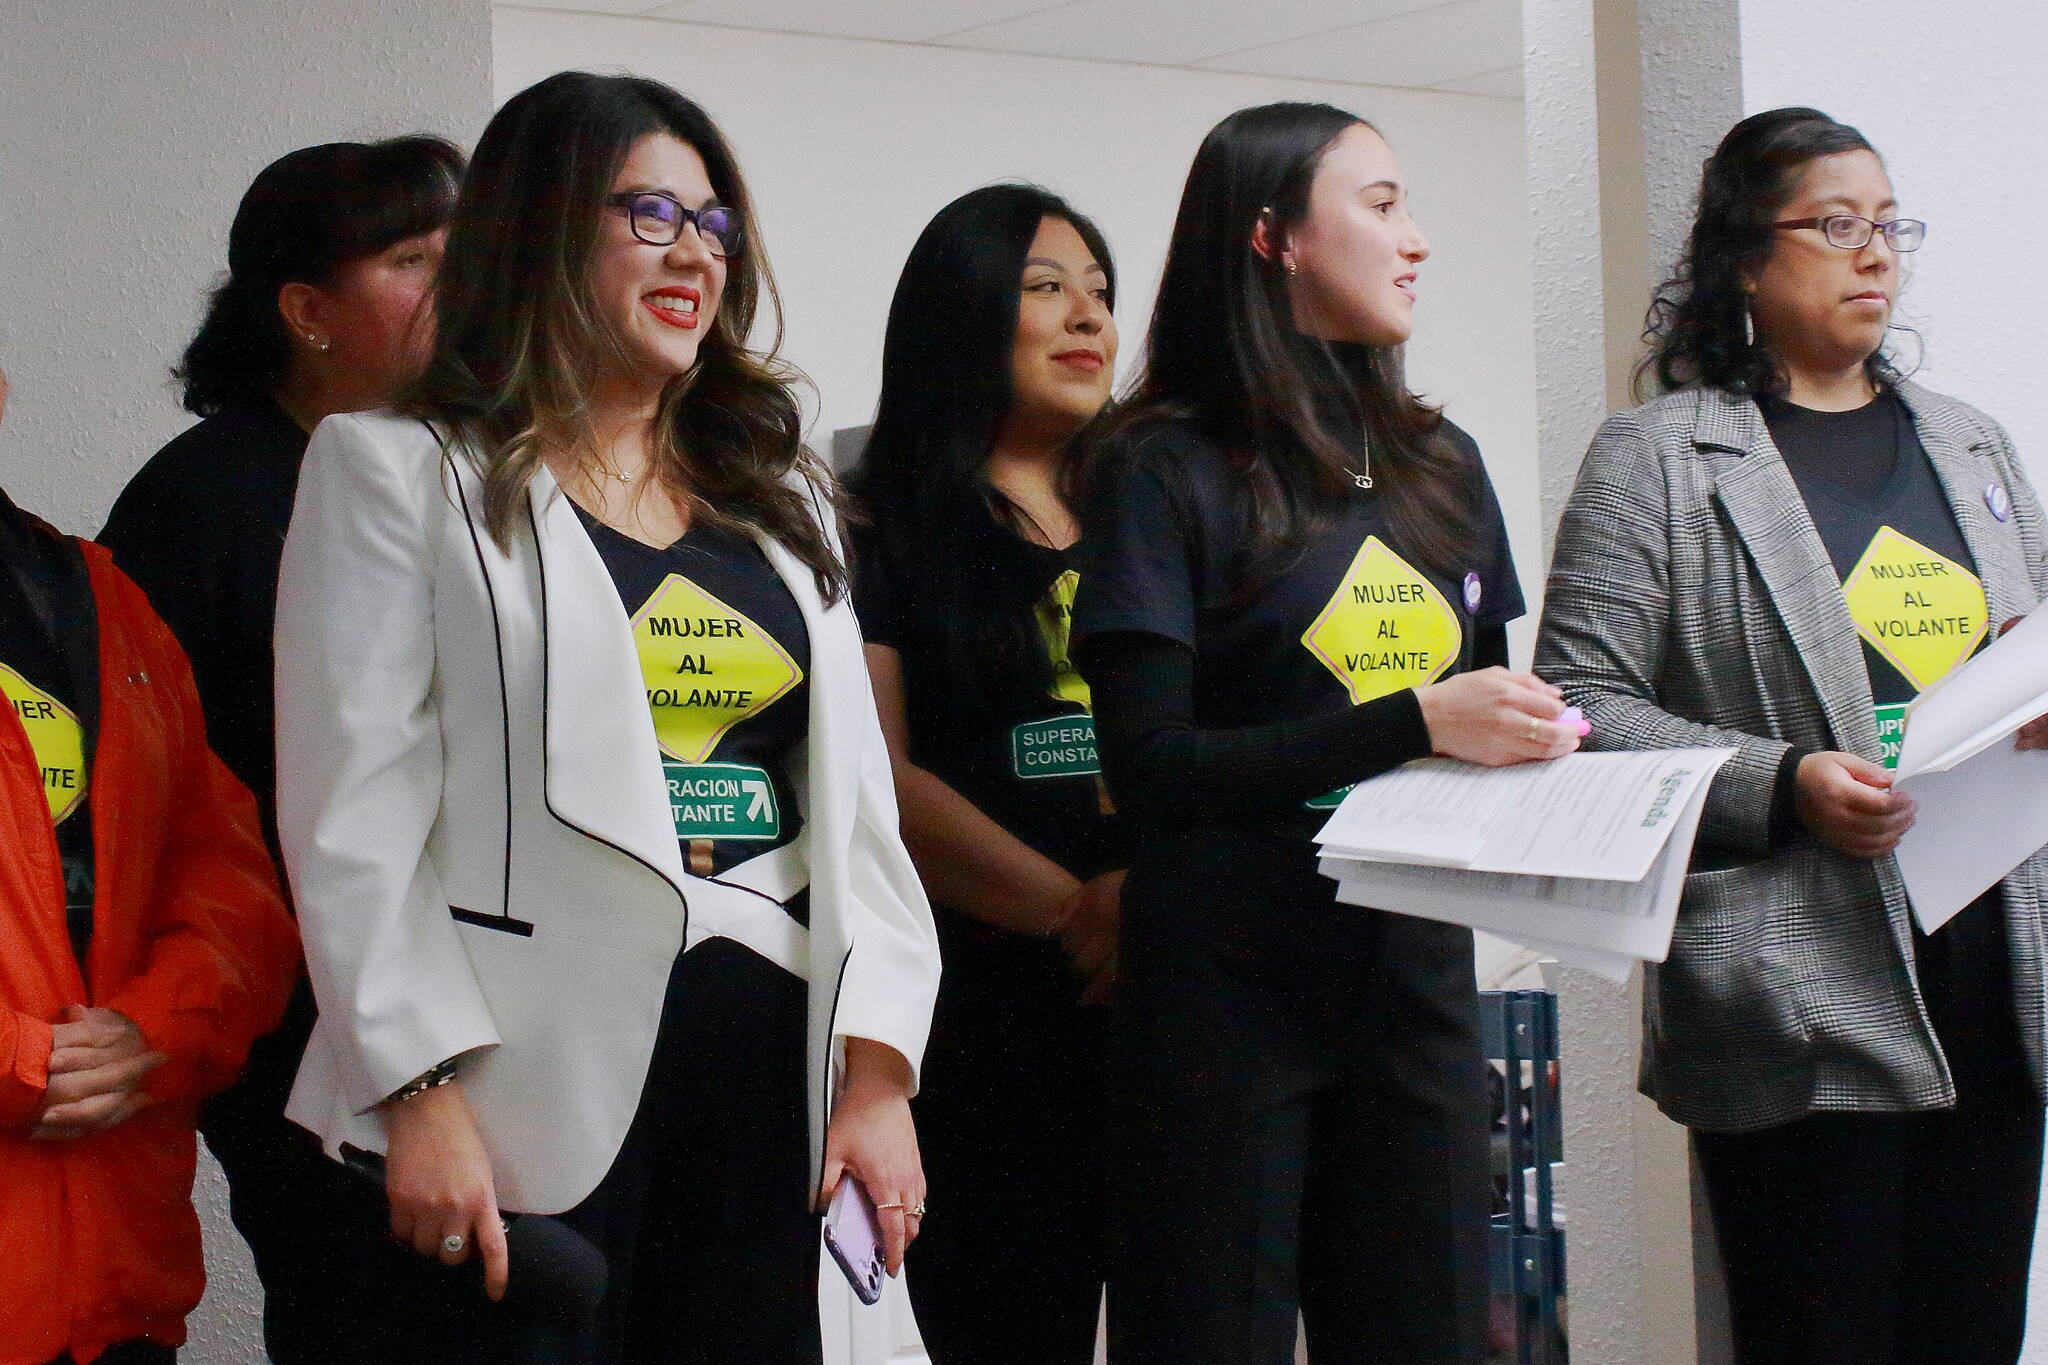 Jacqueline Garcia Castillo and her team at Mujer Al Volante watch Federal Way City Council candidates as the speak to voters at a forum on Wednesday. Photo by Keelin Everly-Lang / The Mirror